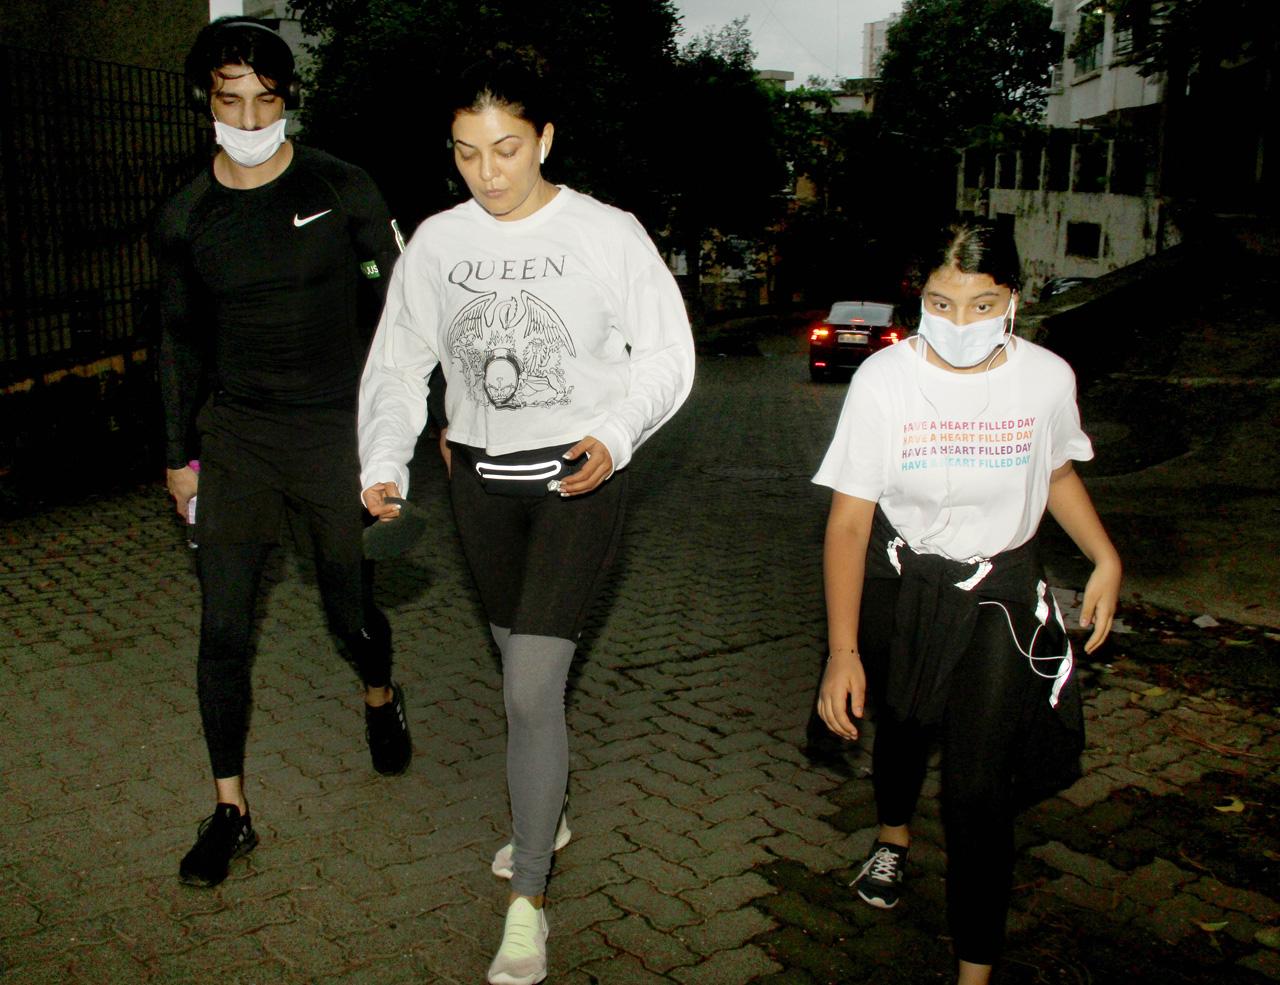 Sushmita Sen along with boyfriend Rohman Shawl and daughter Alisah Sen were spotted out and about in Bandra.